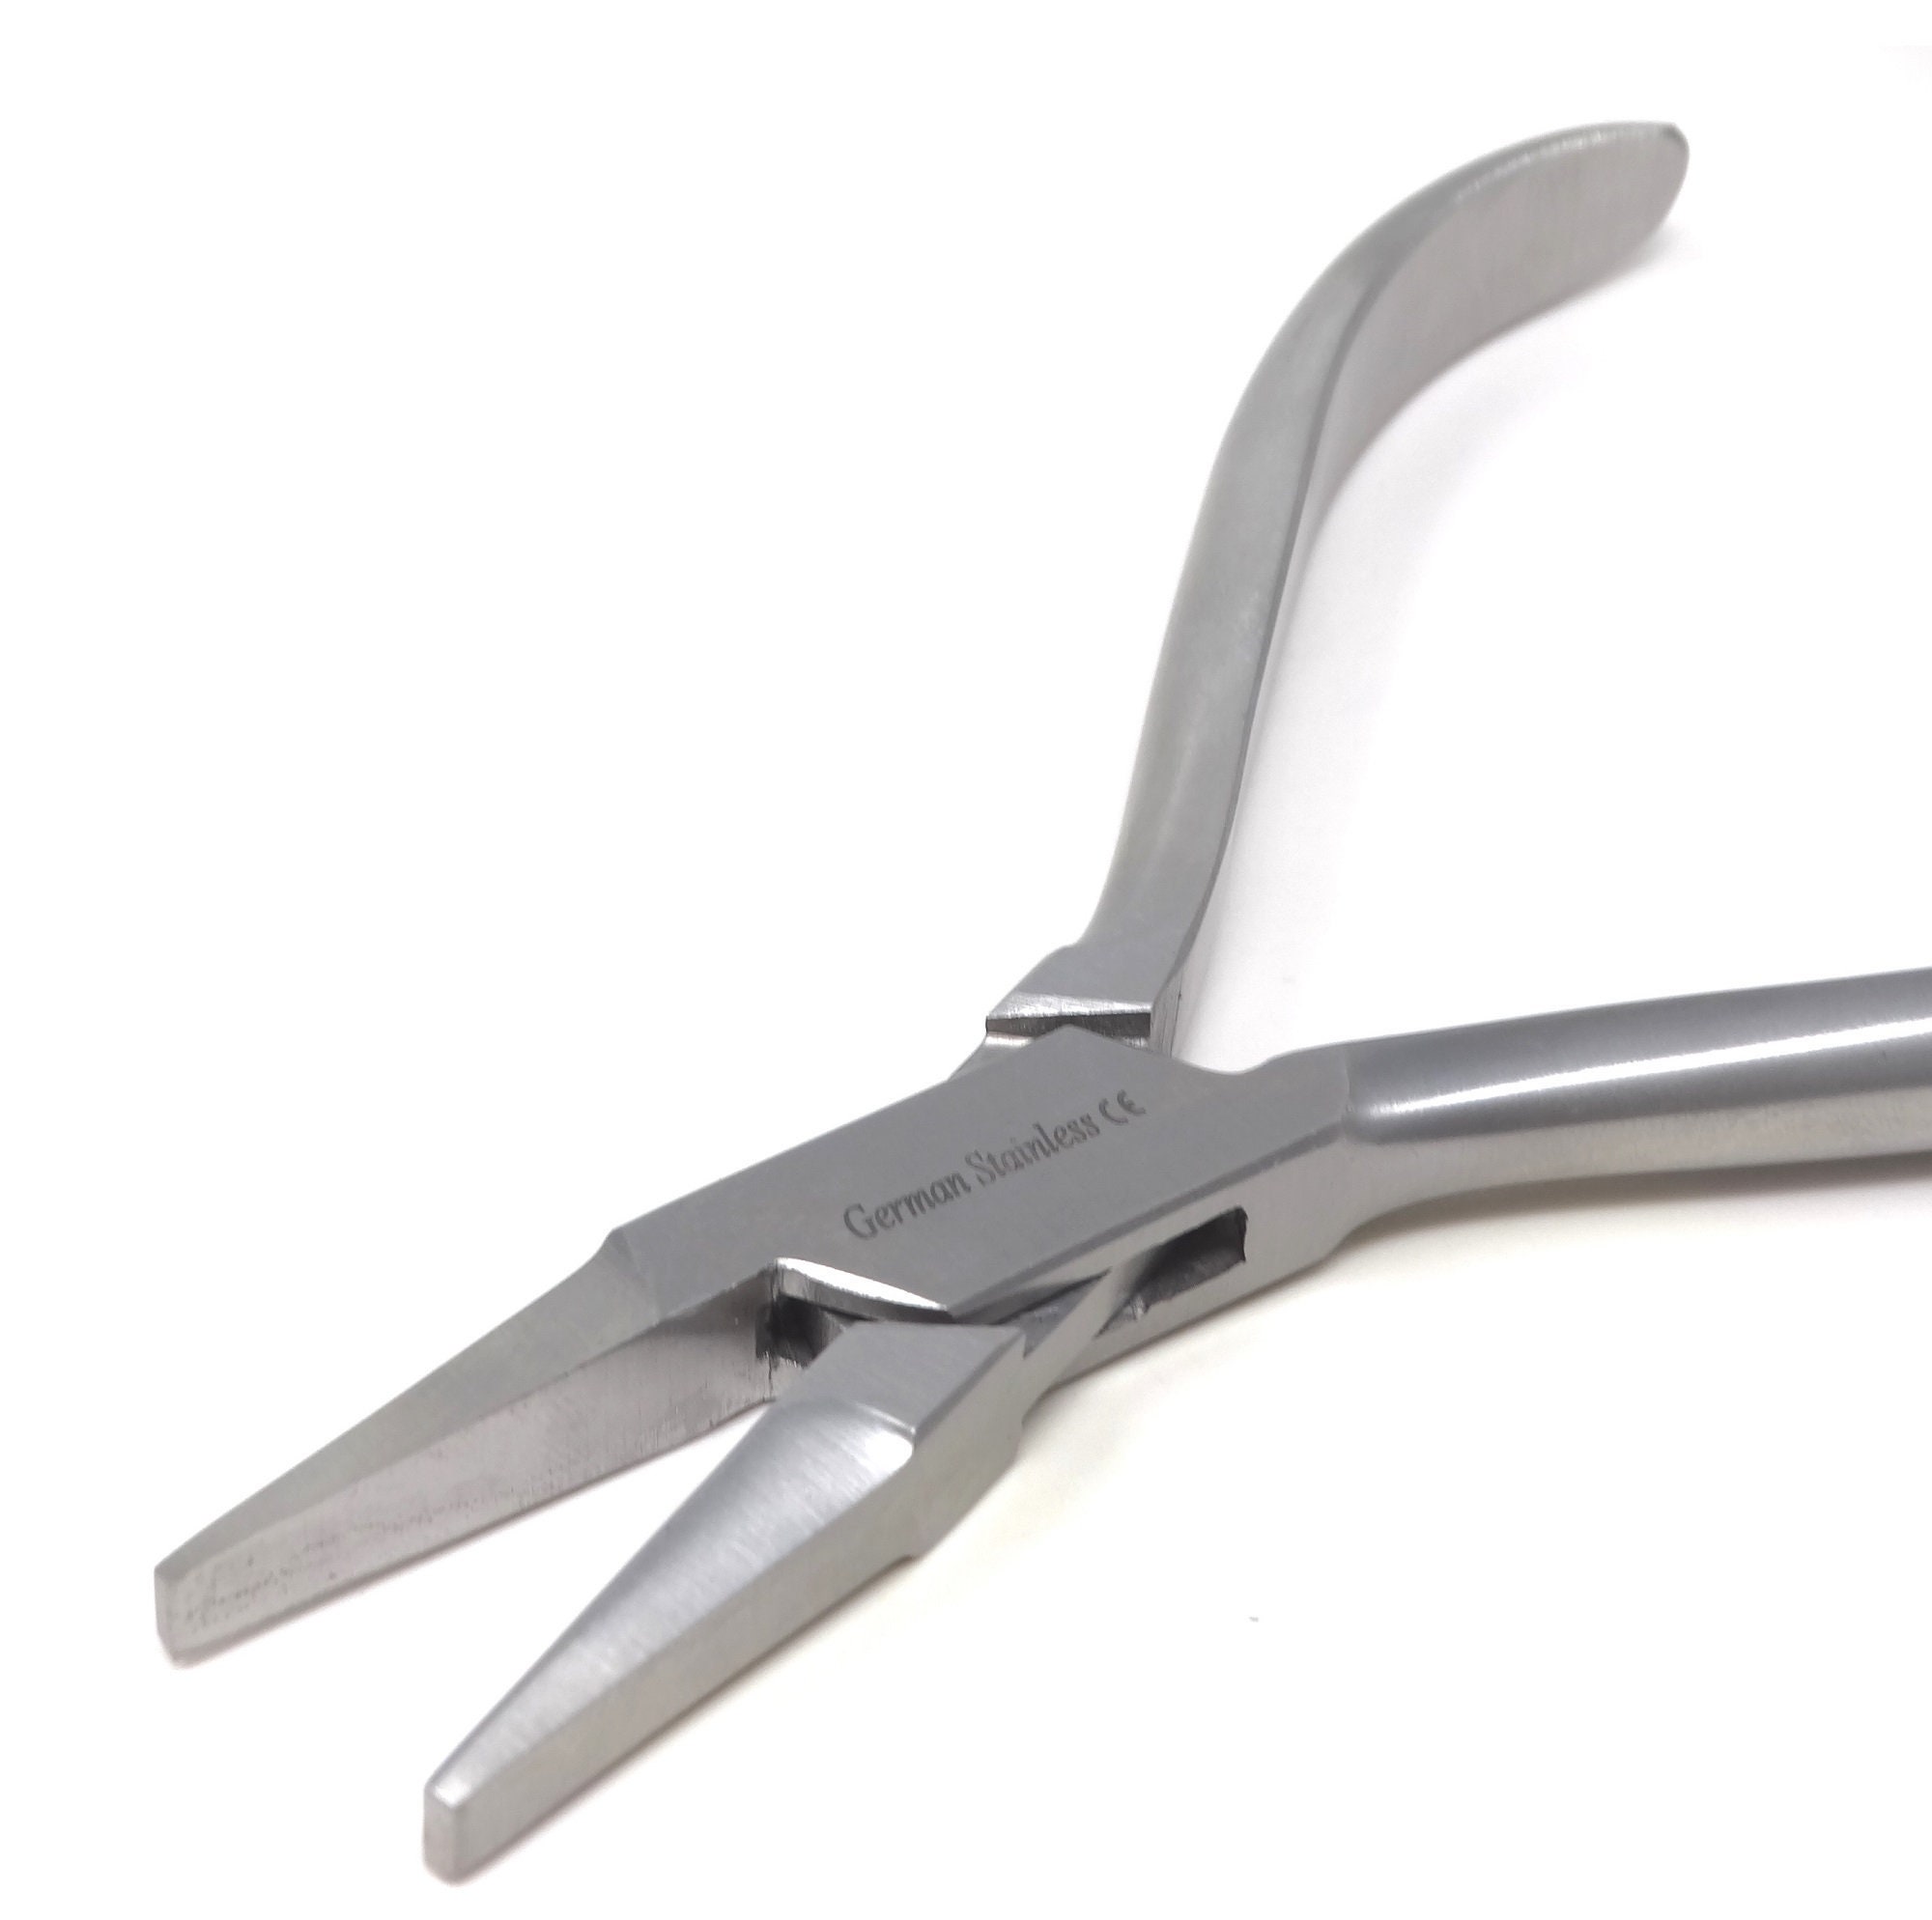 Small Pliers Stainless Steel Tong Head Jewelry Pliers Making Tool